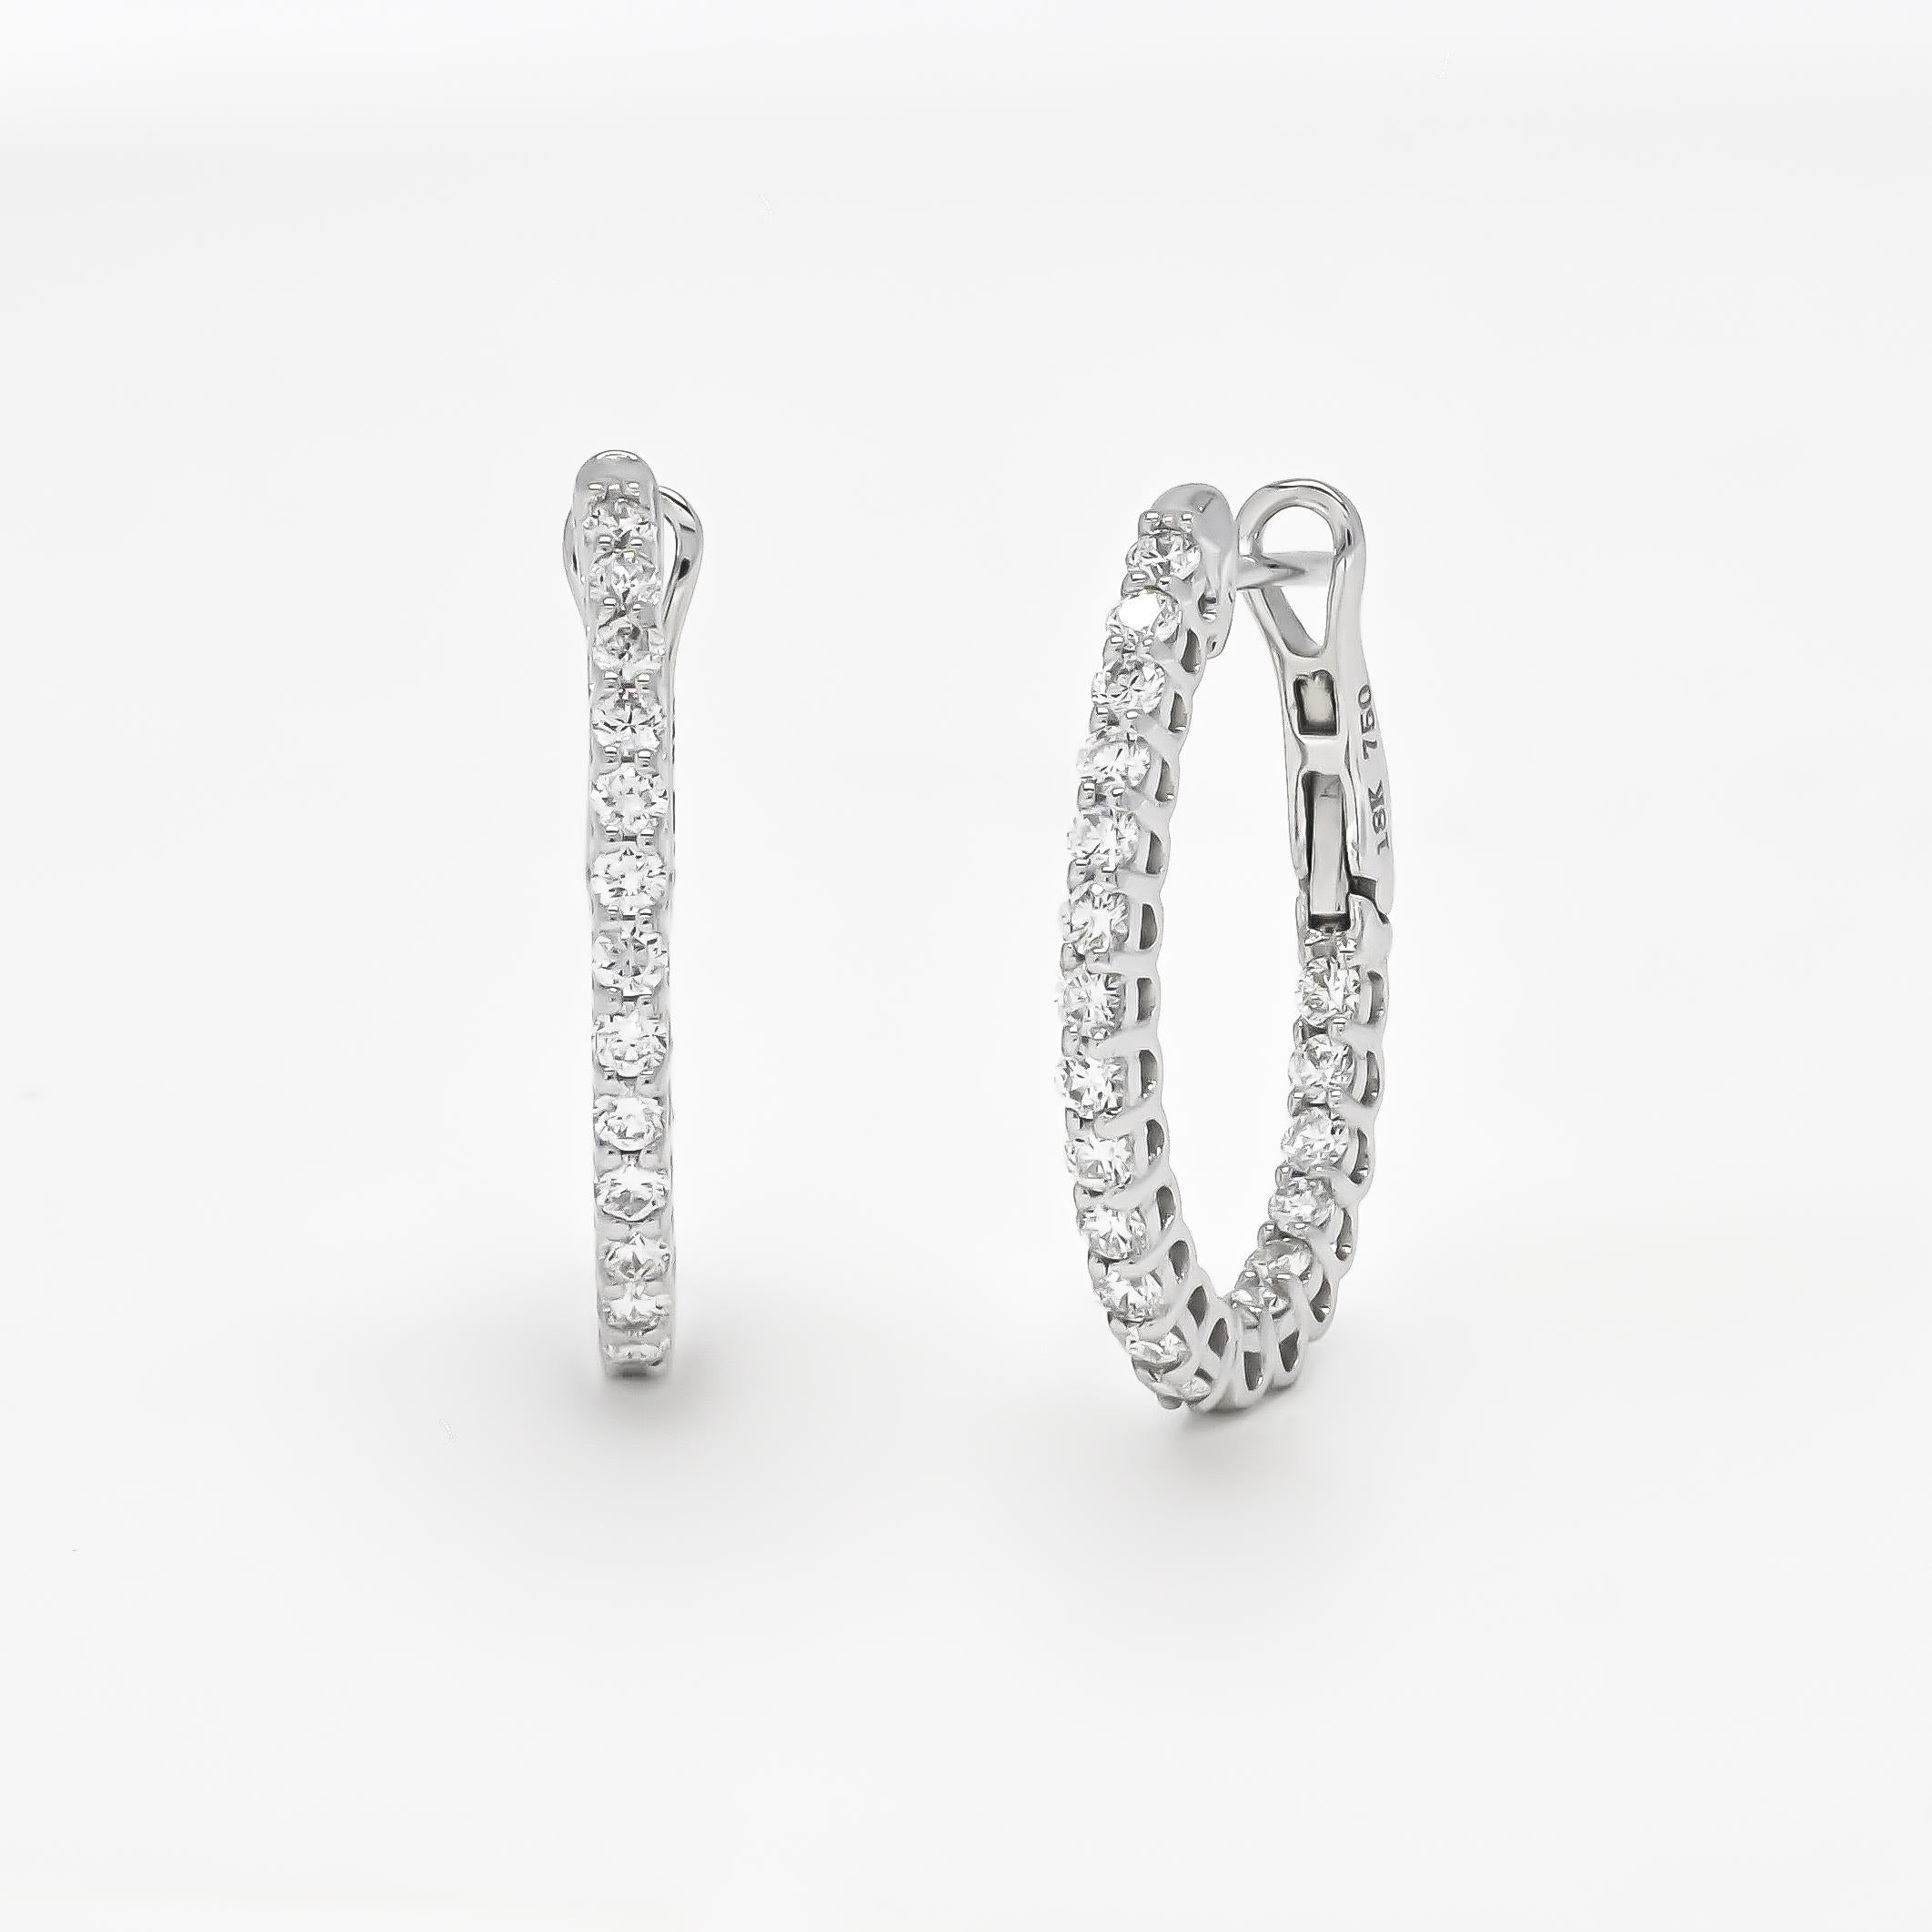 Natural Diamond 1.02 Carats 18KT White Gold 'In and out' Hoop Earrings In New Condition For Sale In Antwerpen, BE